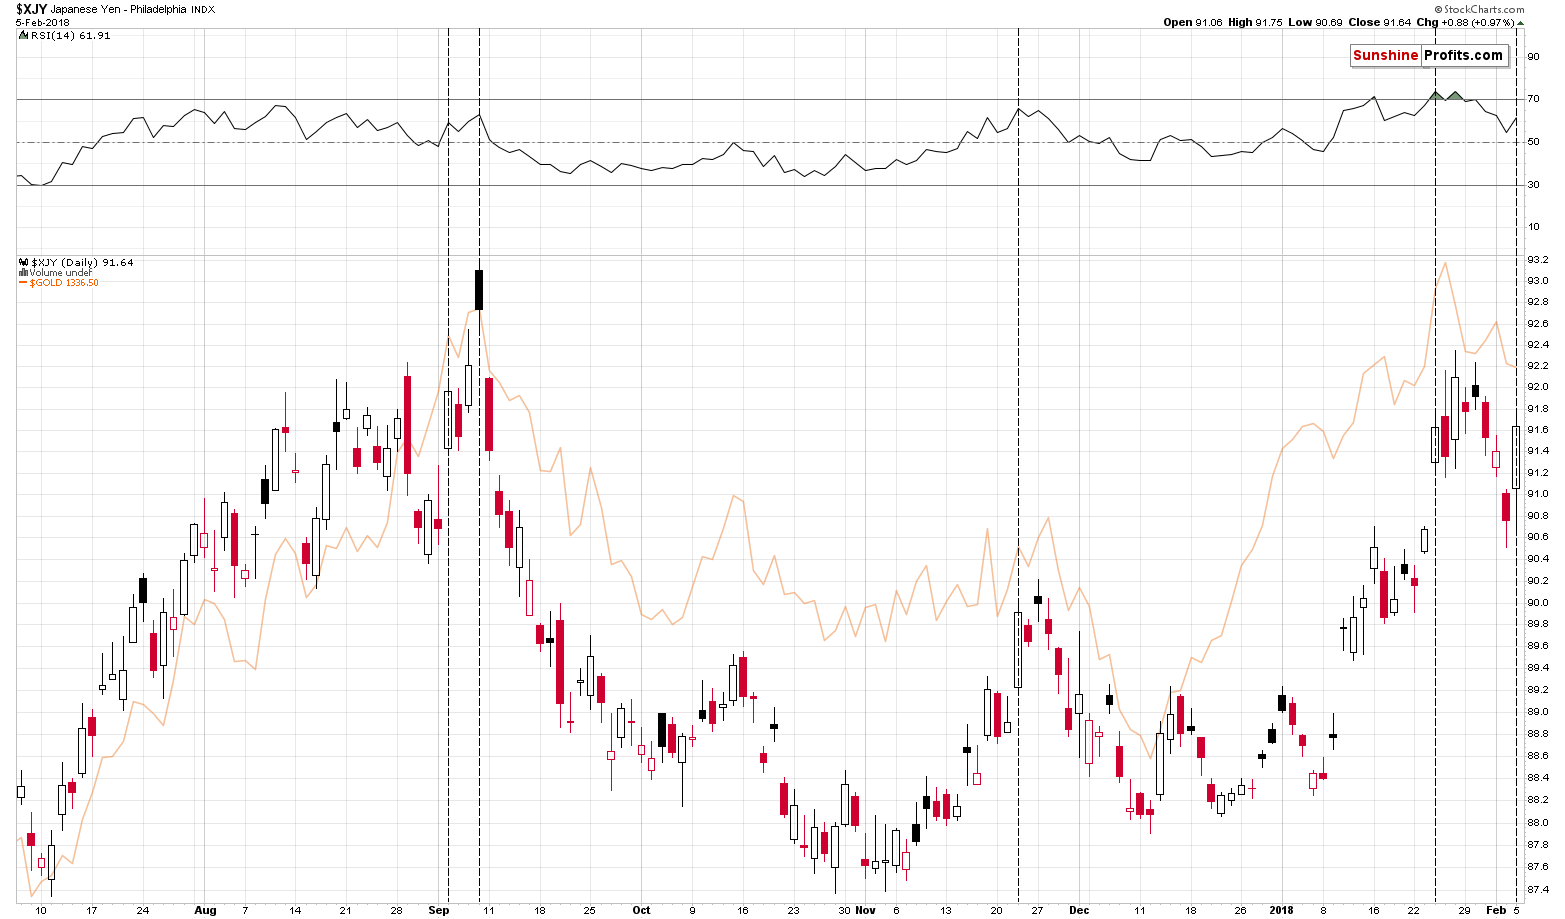 XJY - Japanese Yen and Gold